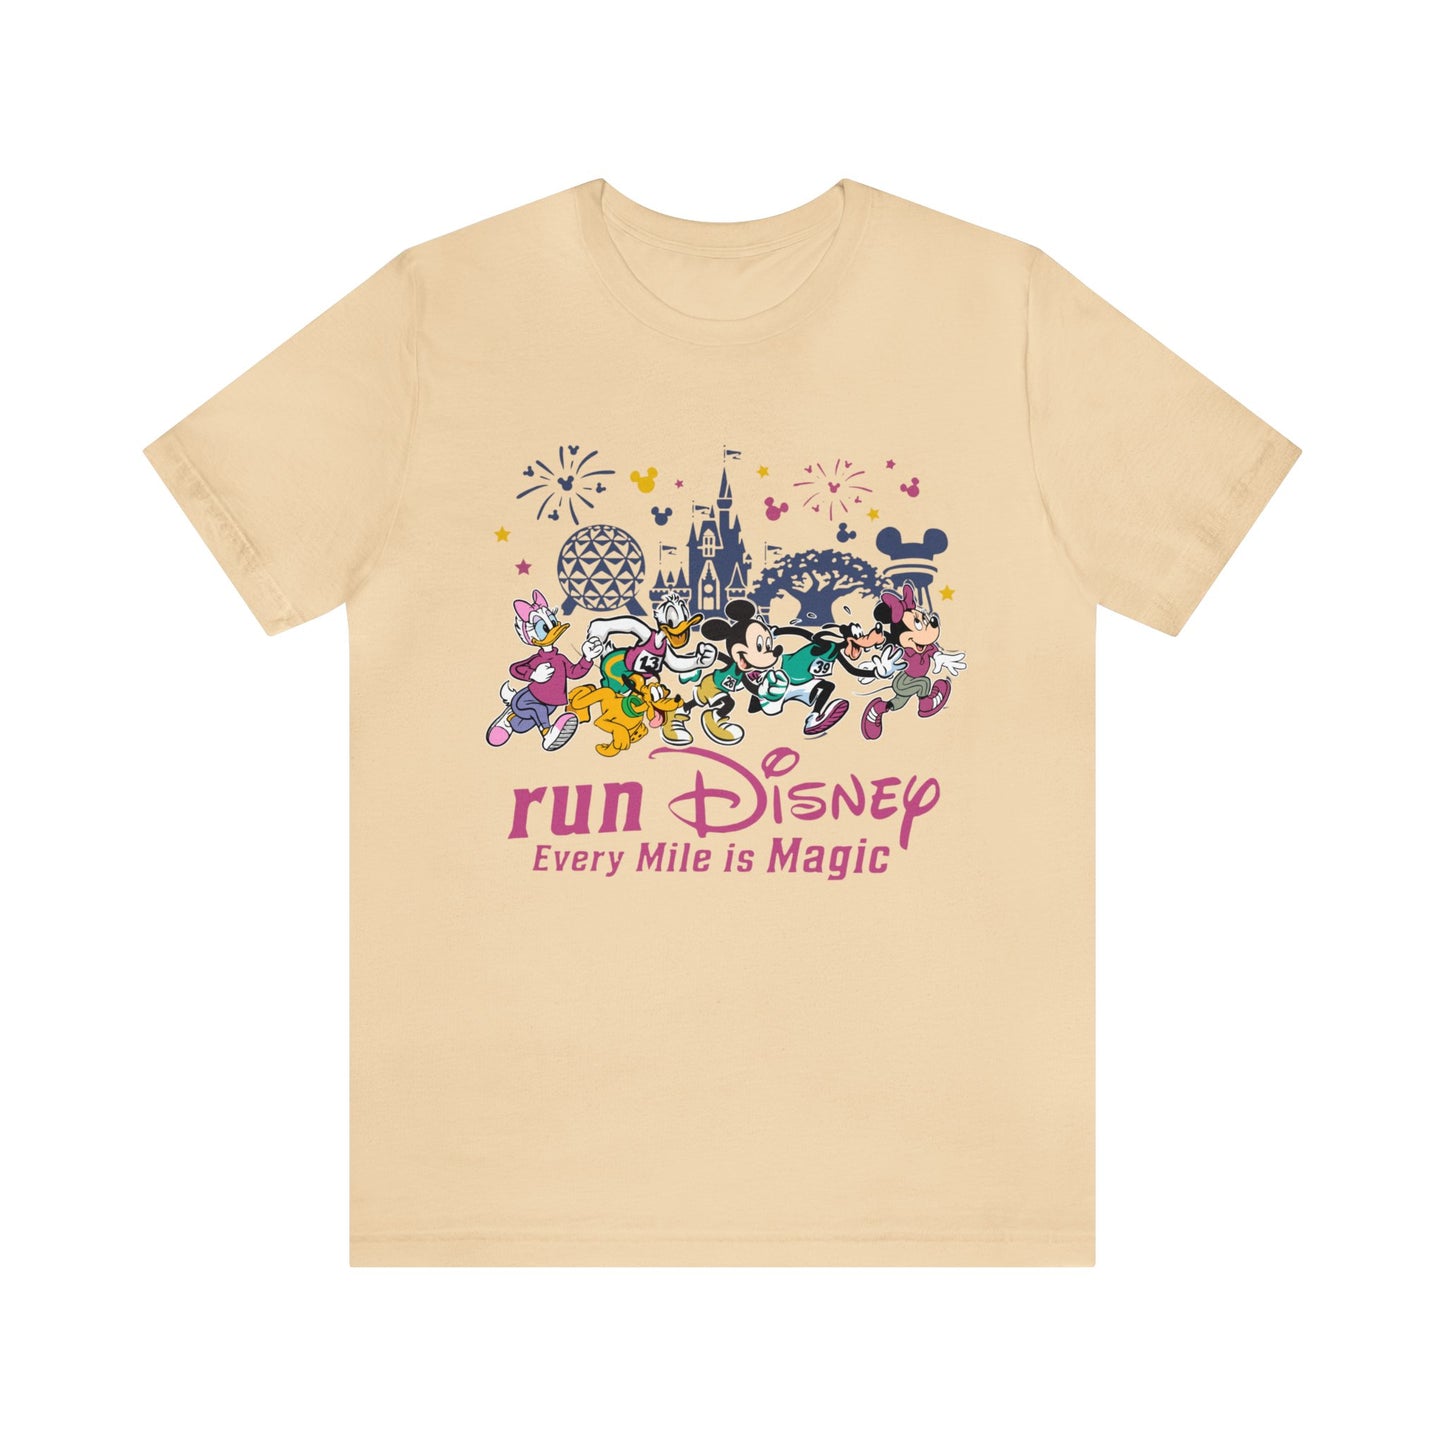 Every Mile Is Magic Unisex Graphic Tee - Multiple Colors